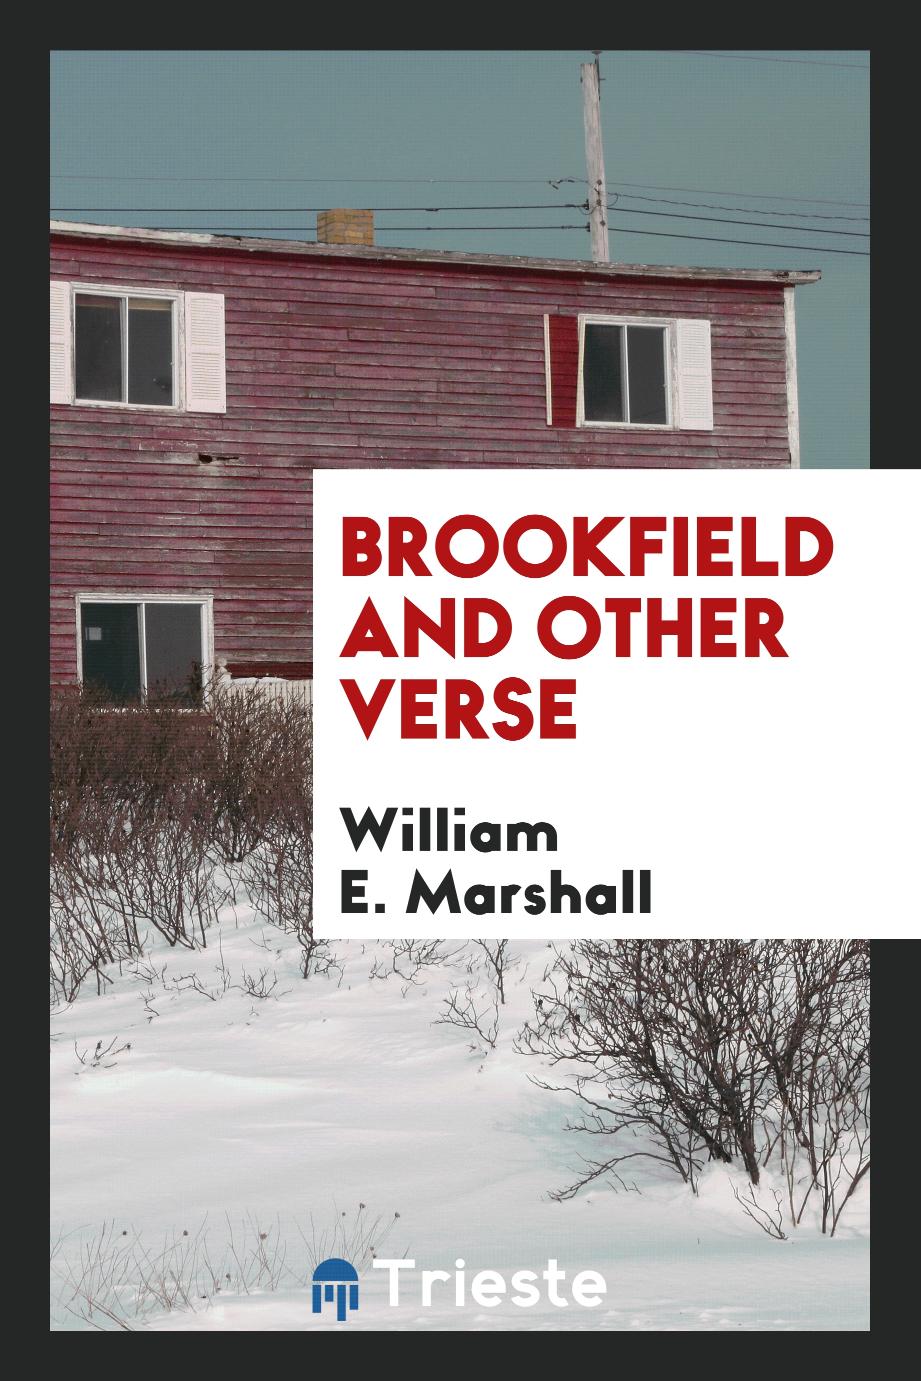 Brookfield and other verse